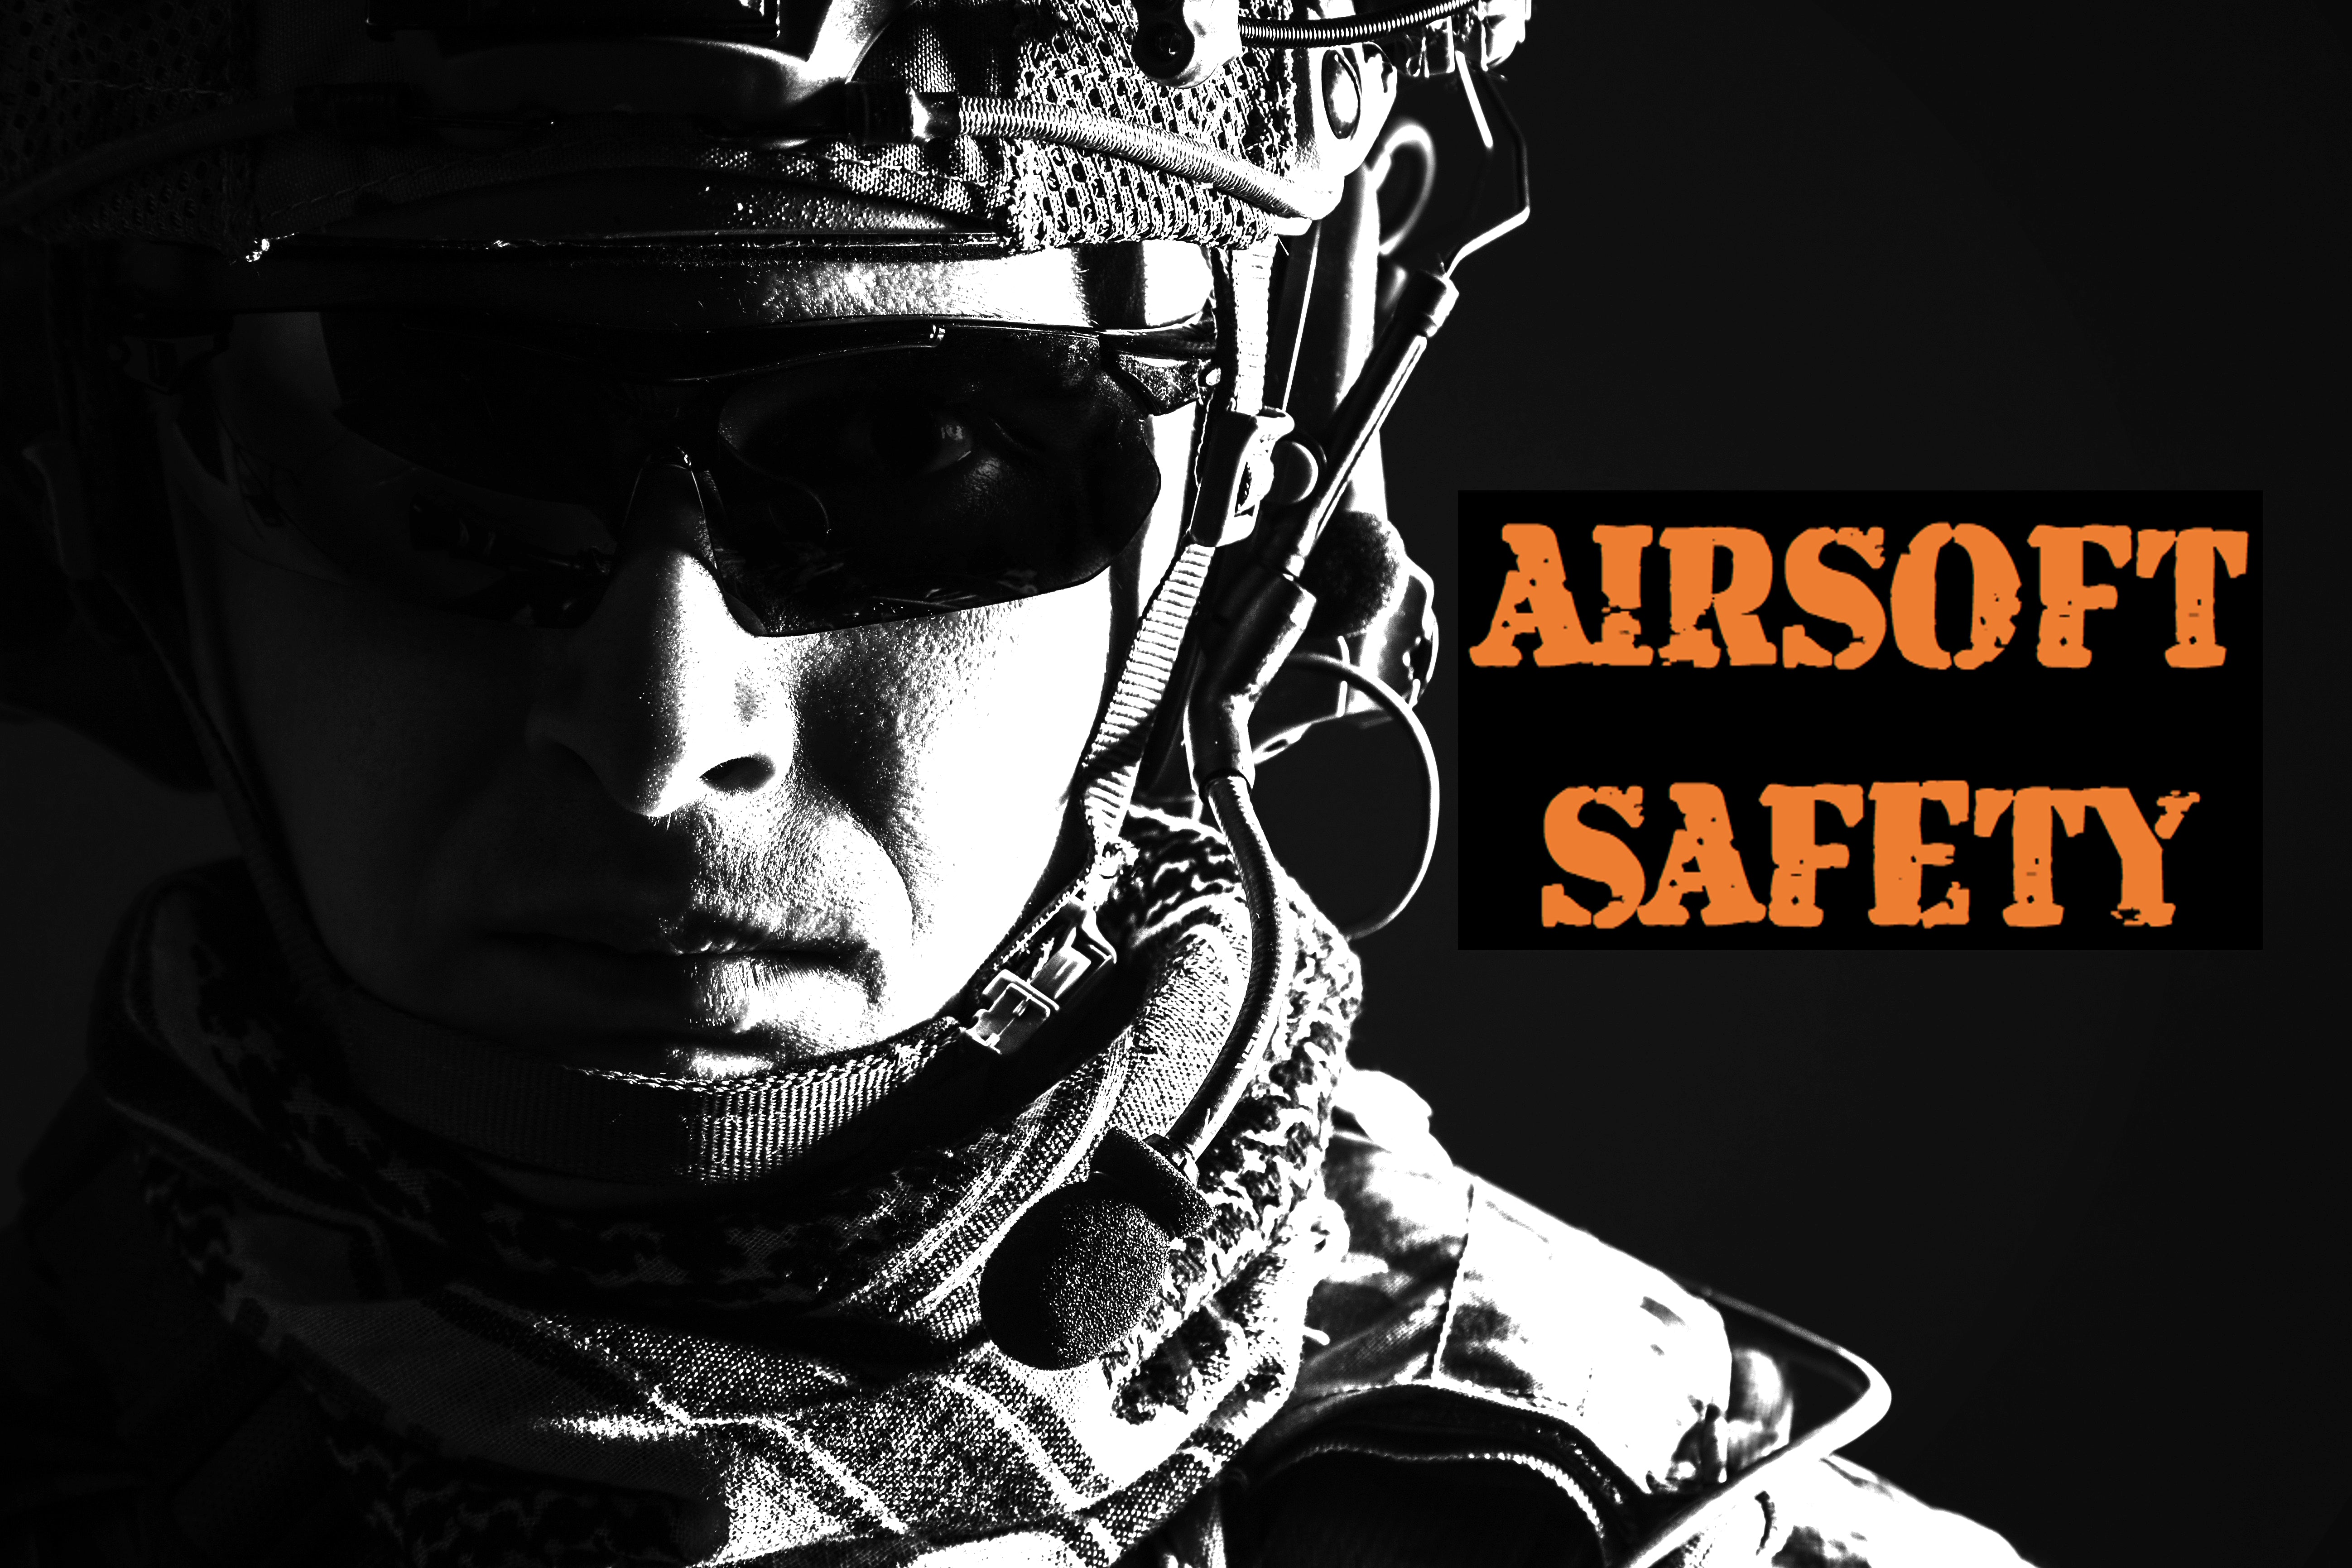 AIRSOFT SAFETY - A few pointers for players old and new!